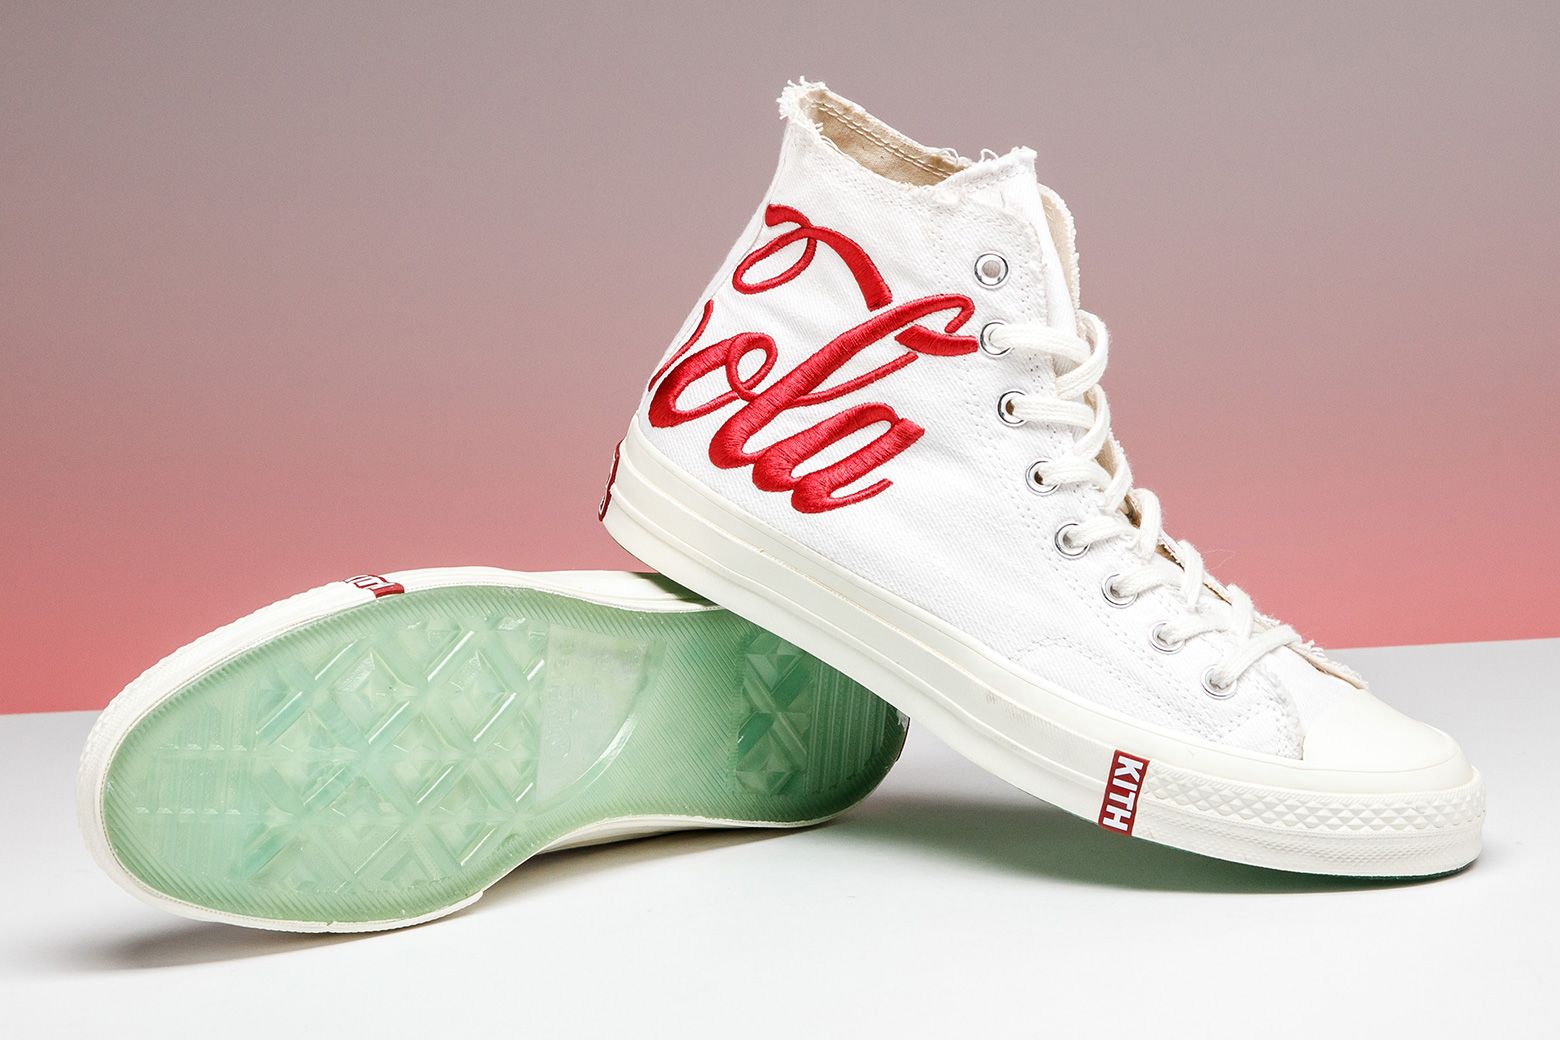 Stadium Goods on Twitter: "KITH's limited edition Coca-Cola x Converse  Chuck Taylor '70s feature premium denim, bottle-cap patches, and green  outsoles. Thoughts on the all-white colorway? https://t.co/aiUiWPCv9j Enjoy  FREE domestic ground shipping!